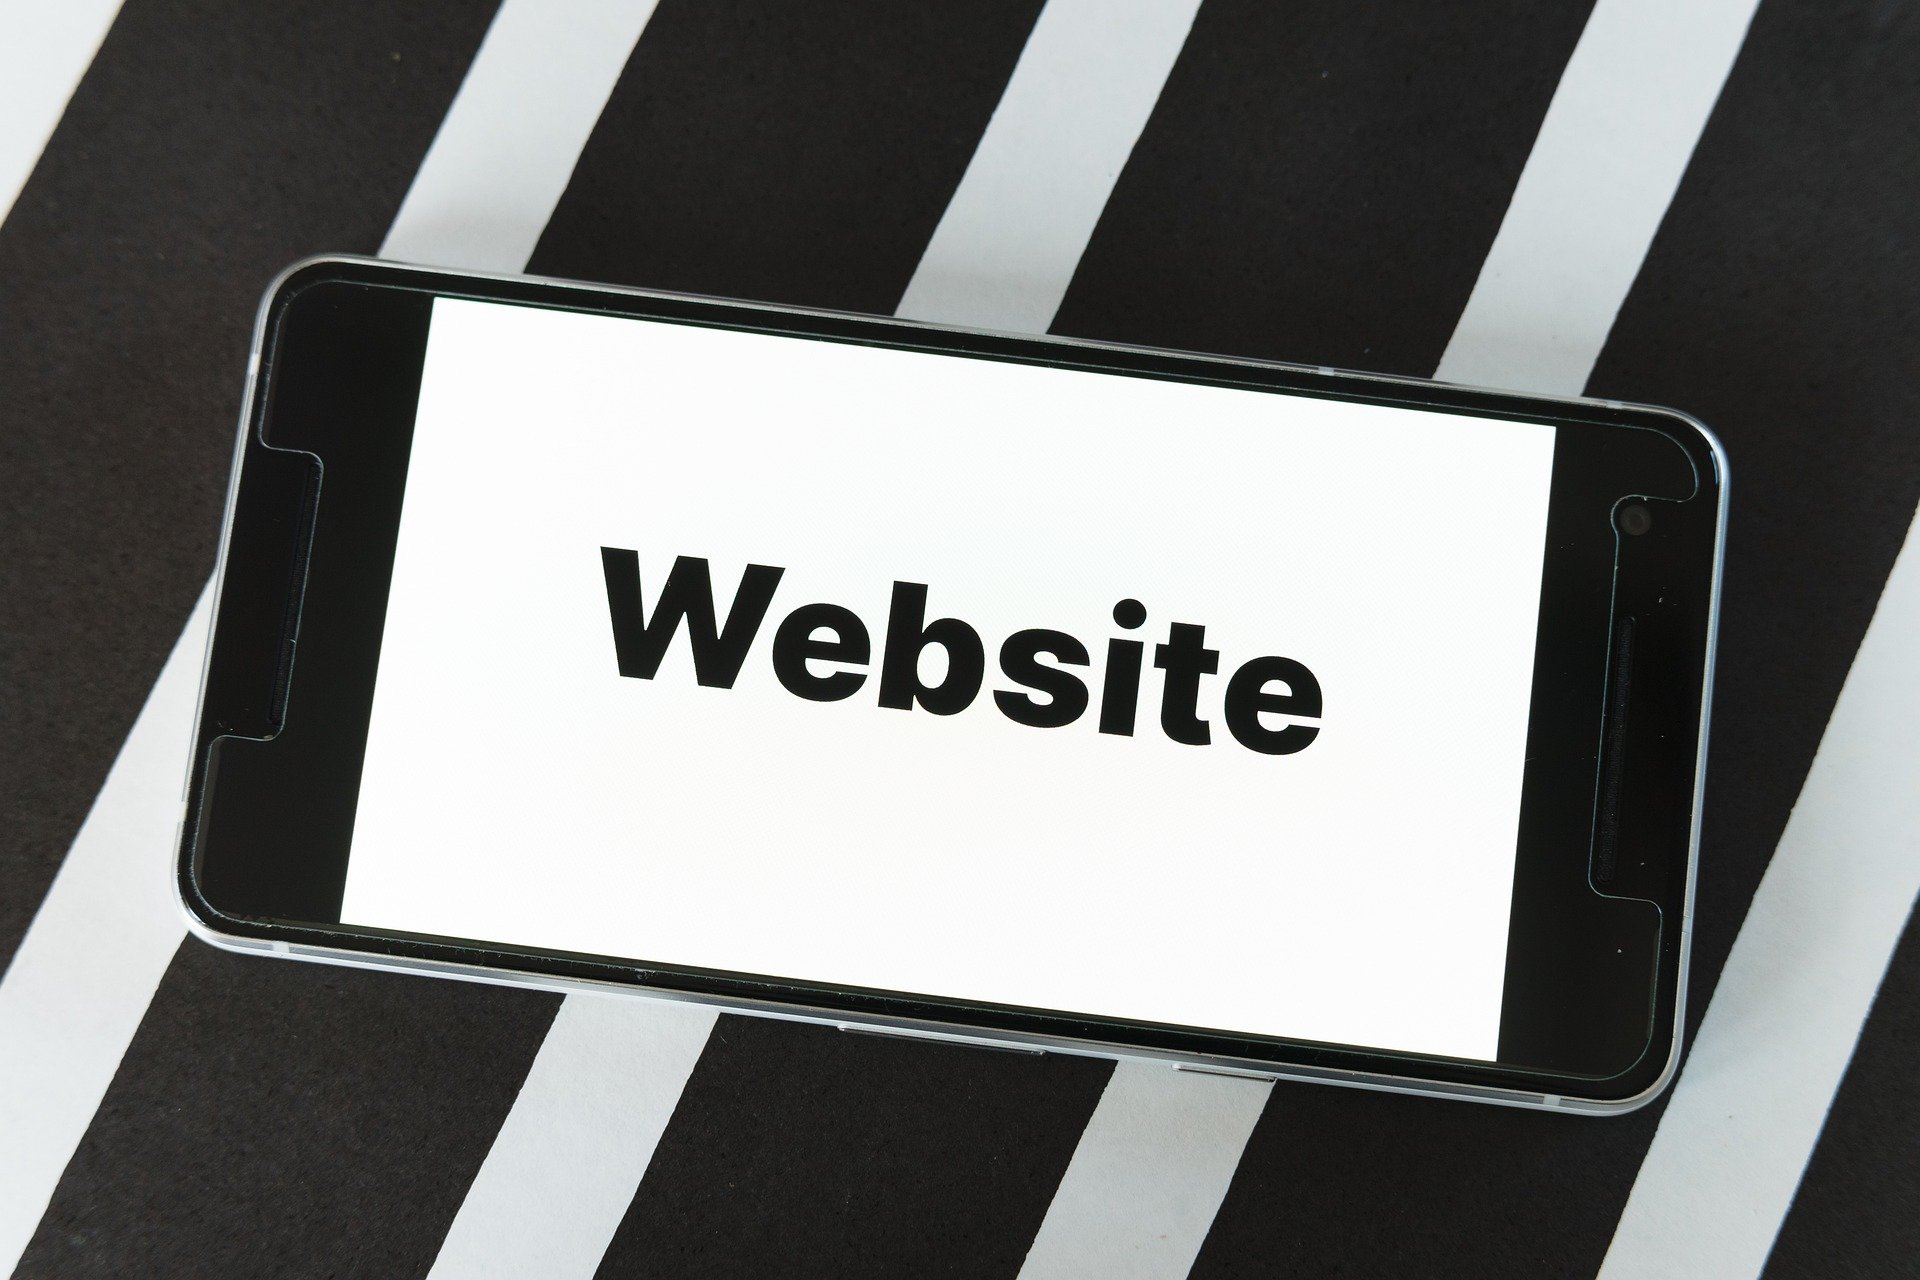 Take Your Business Online With The Website Builder: A Simple (But Complete) Guide